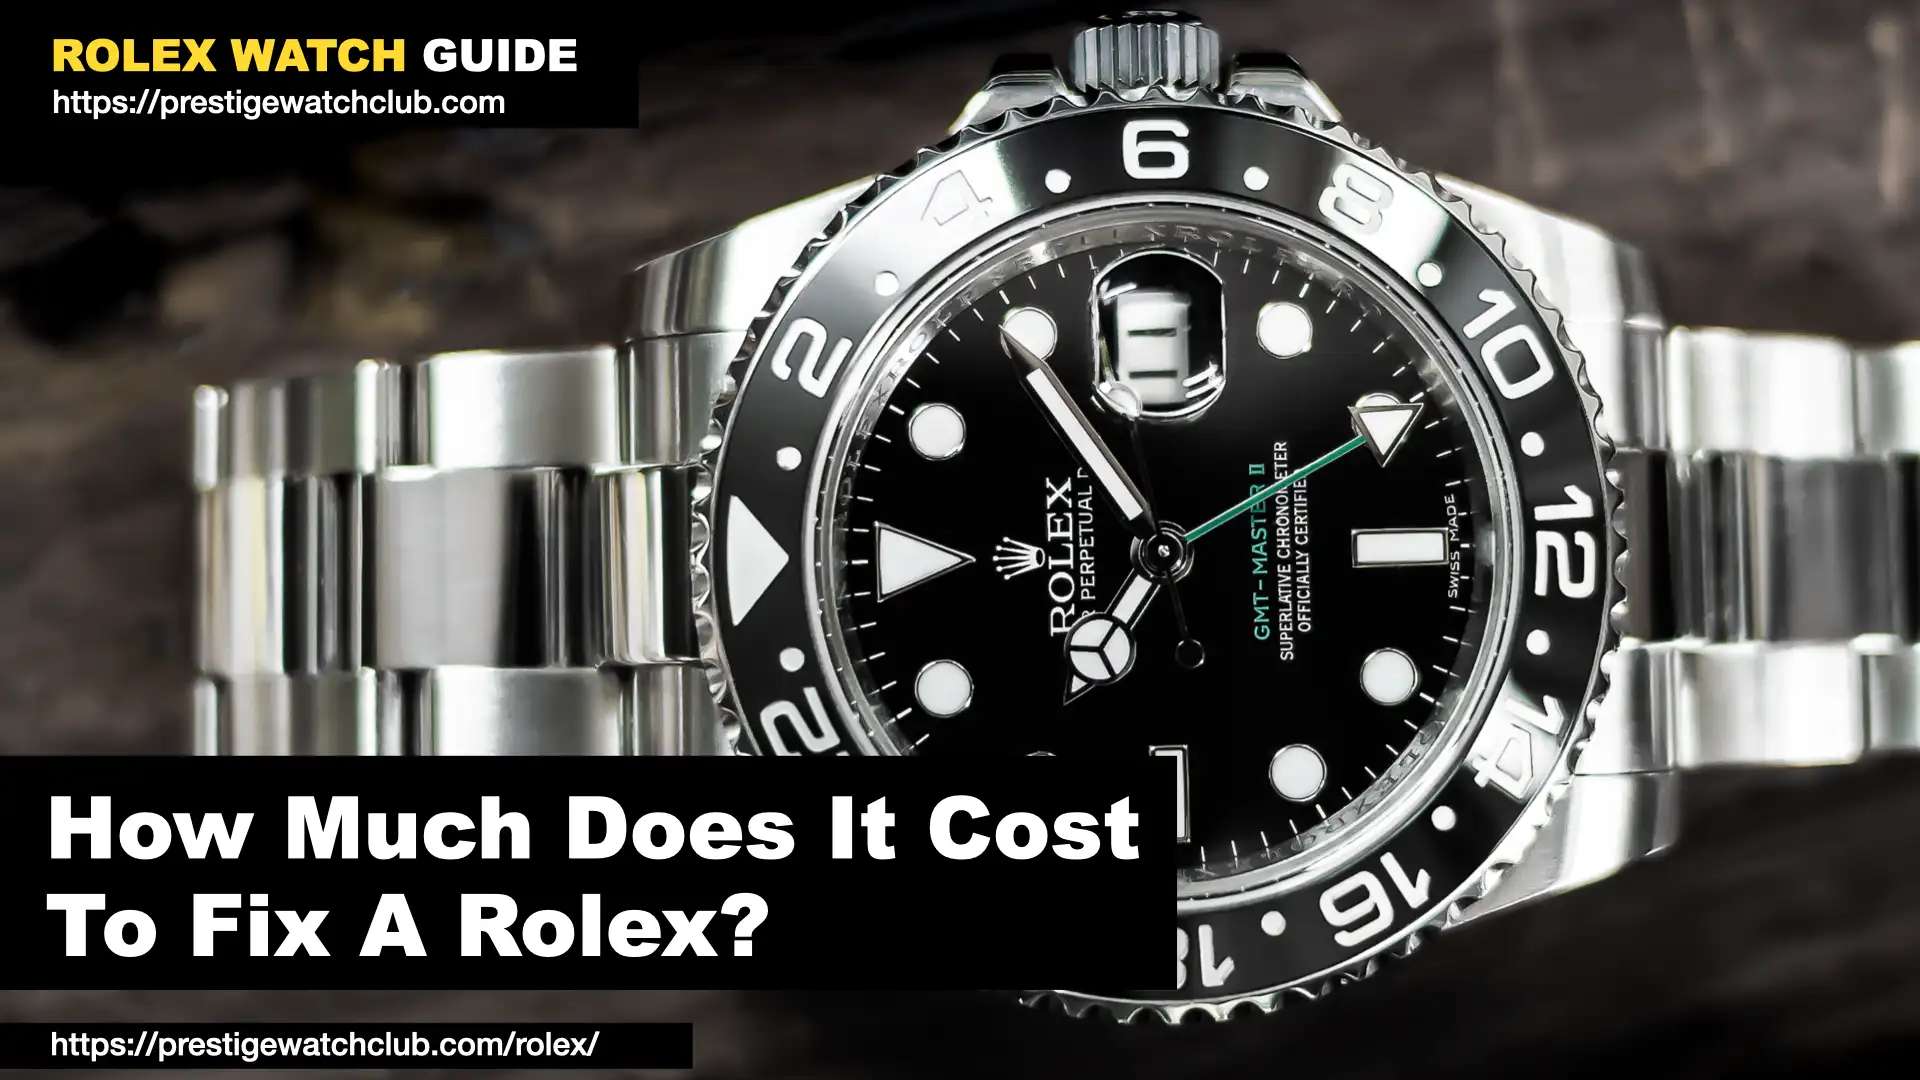 How Much Does It Cost To Fix A Rolex?